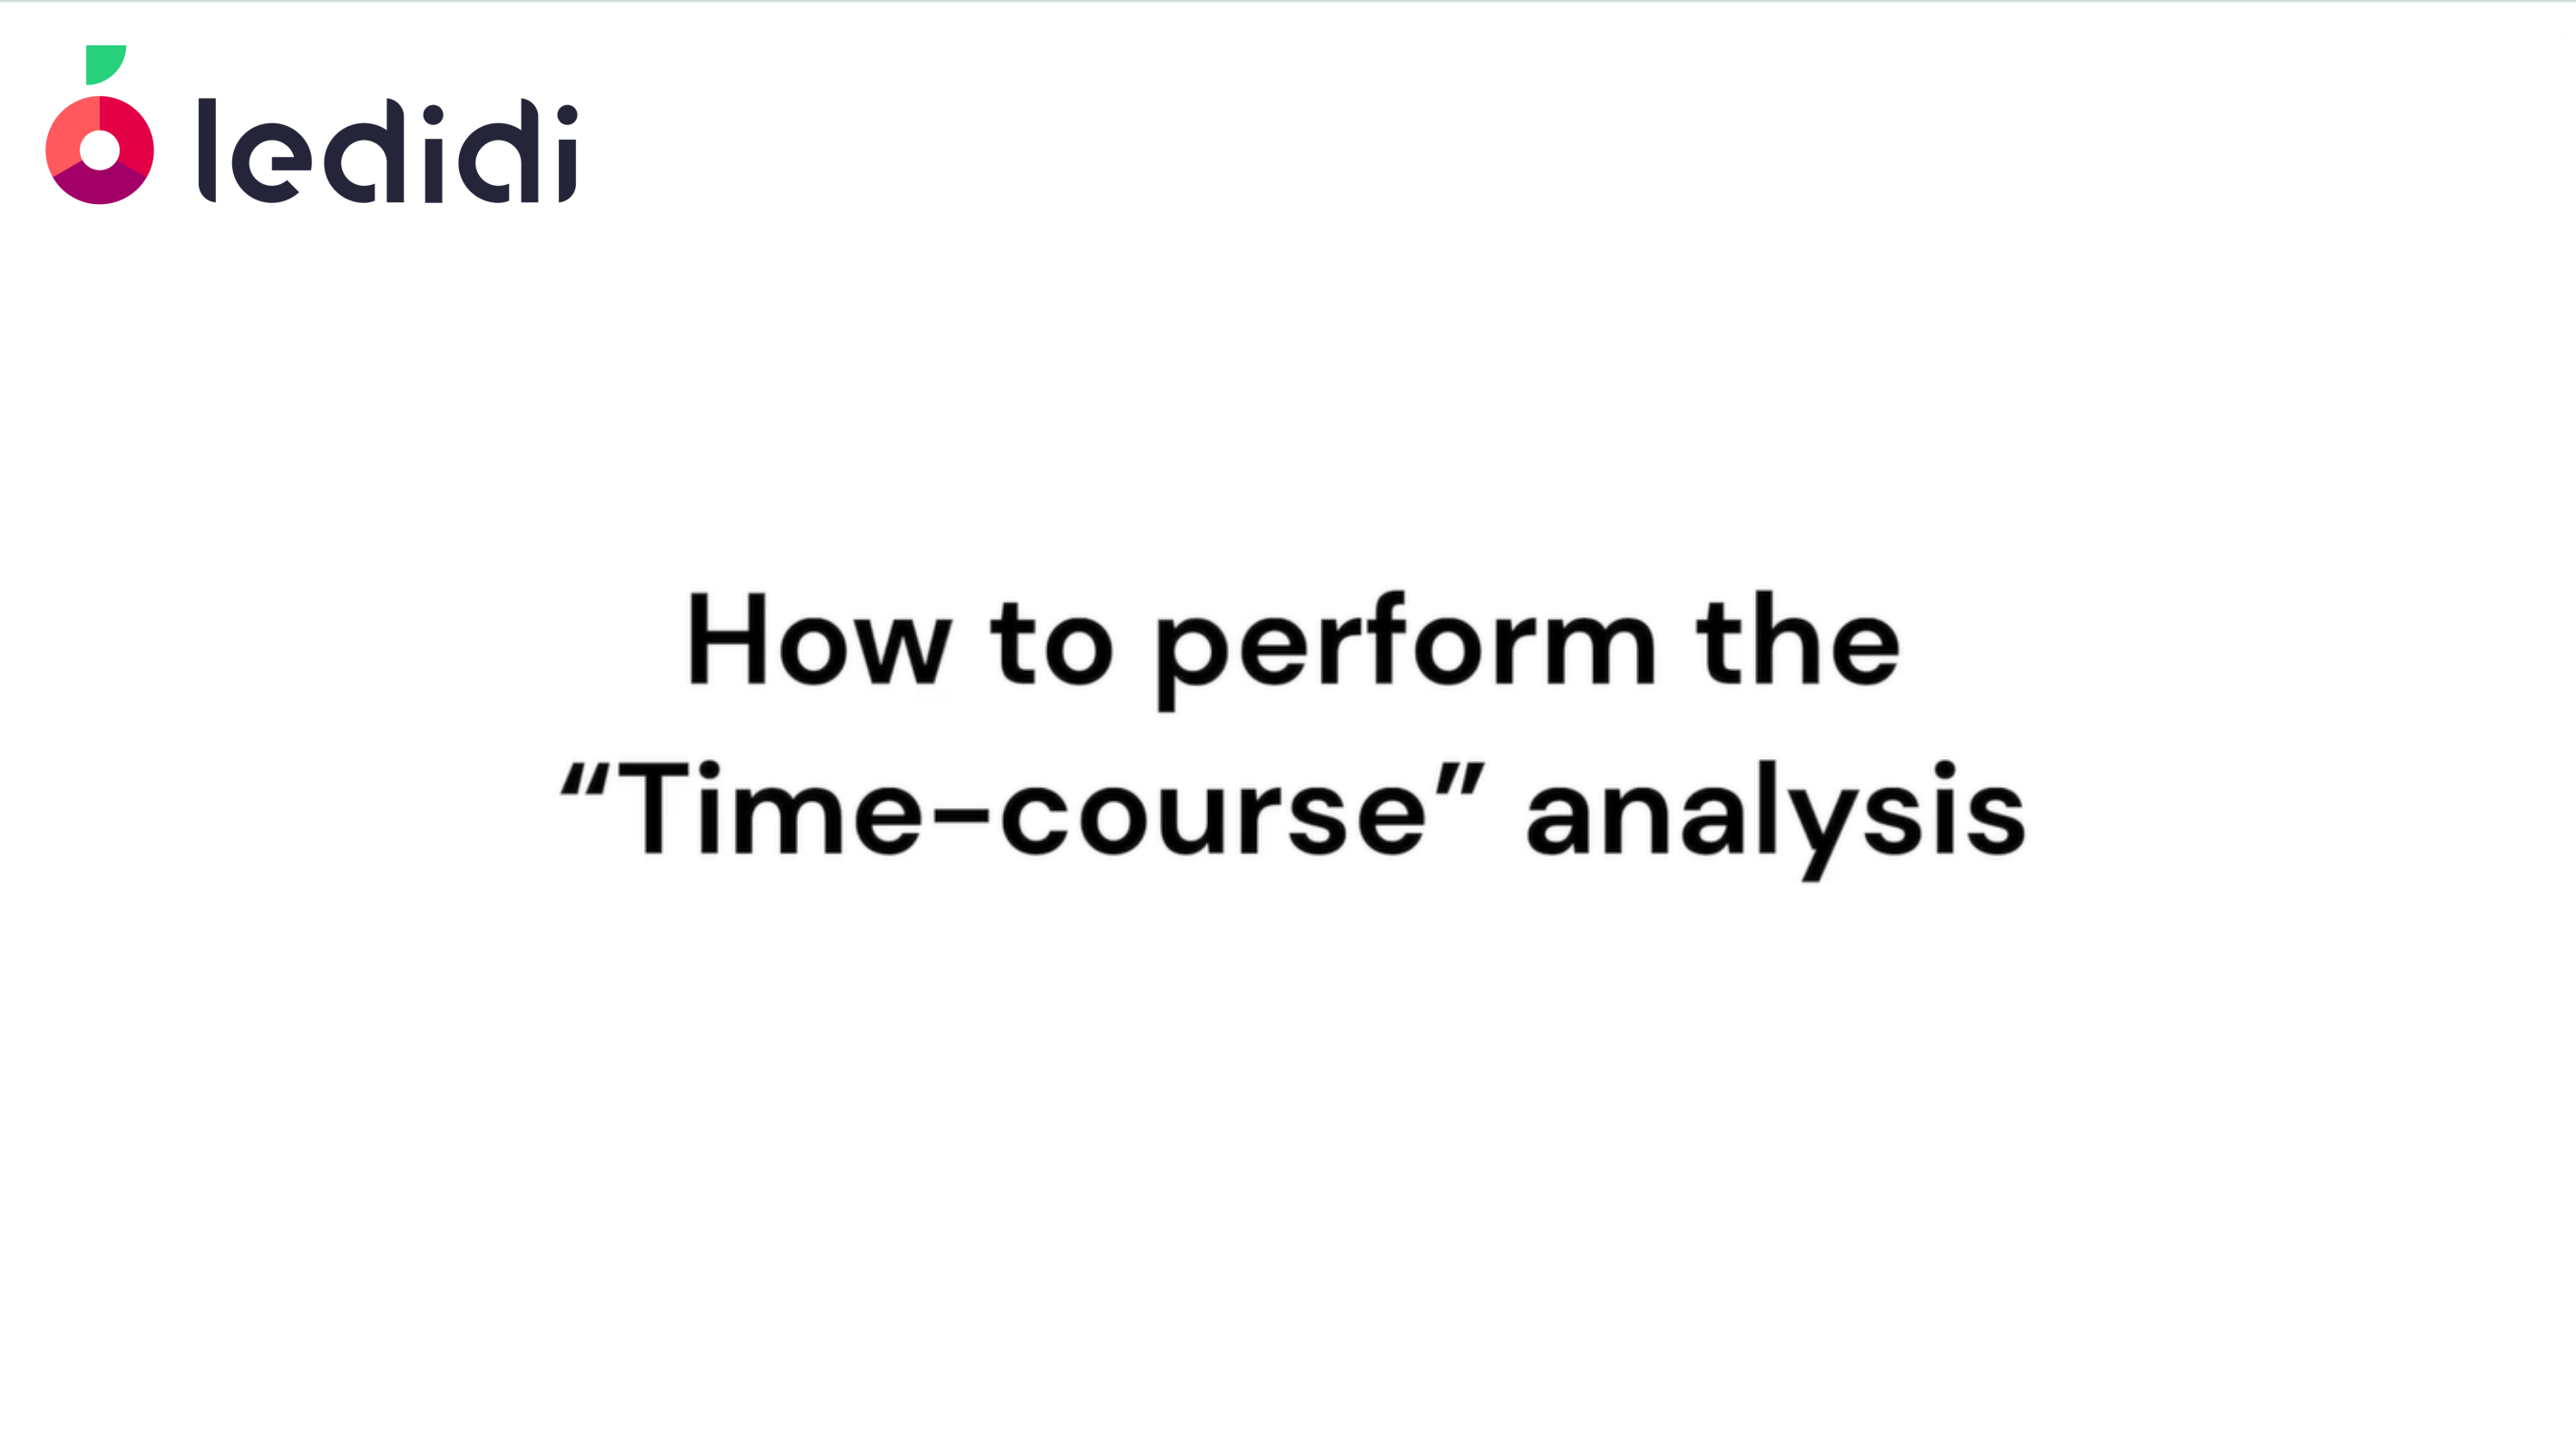 How to perform the "time-course" analysis